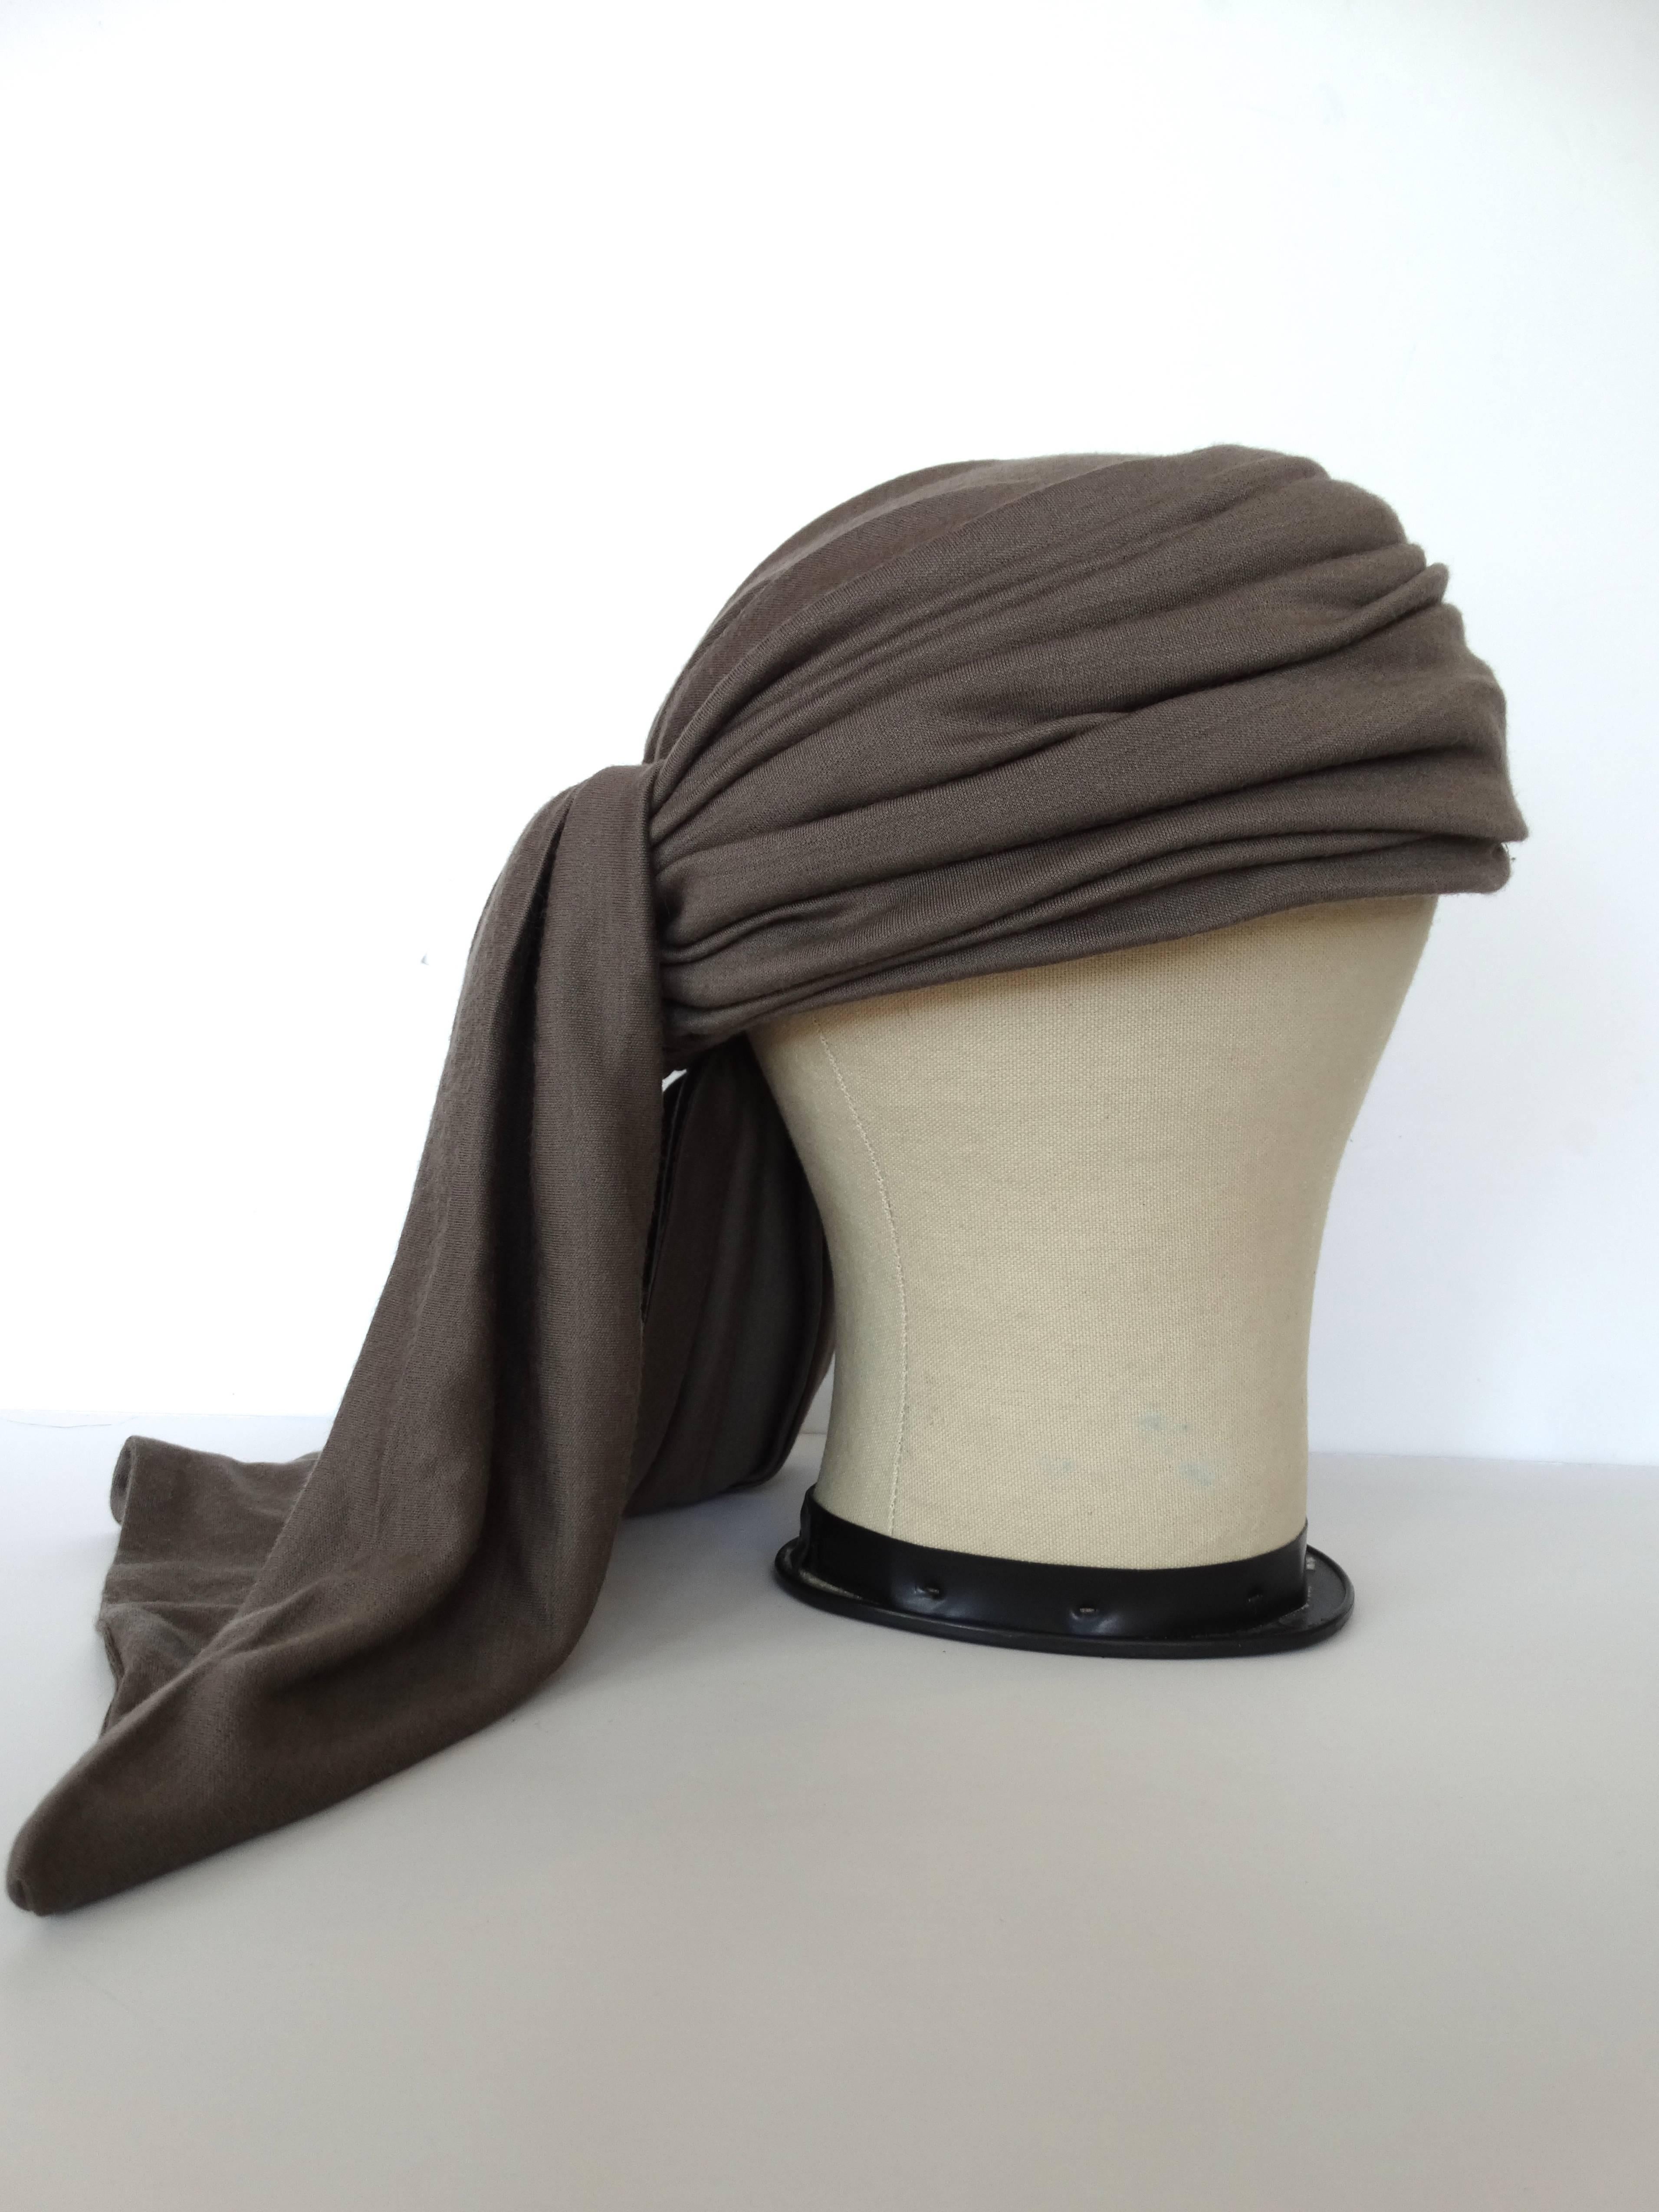 This iconic Rive Gauche YSL Turban is a true Yves Saint Laurent collectors dream piece. Numbered #453 in a very pretty shade of Taupe. Measures approx. 21